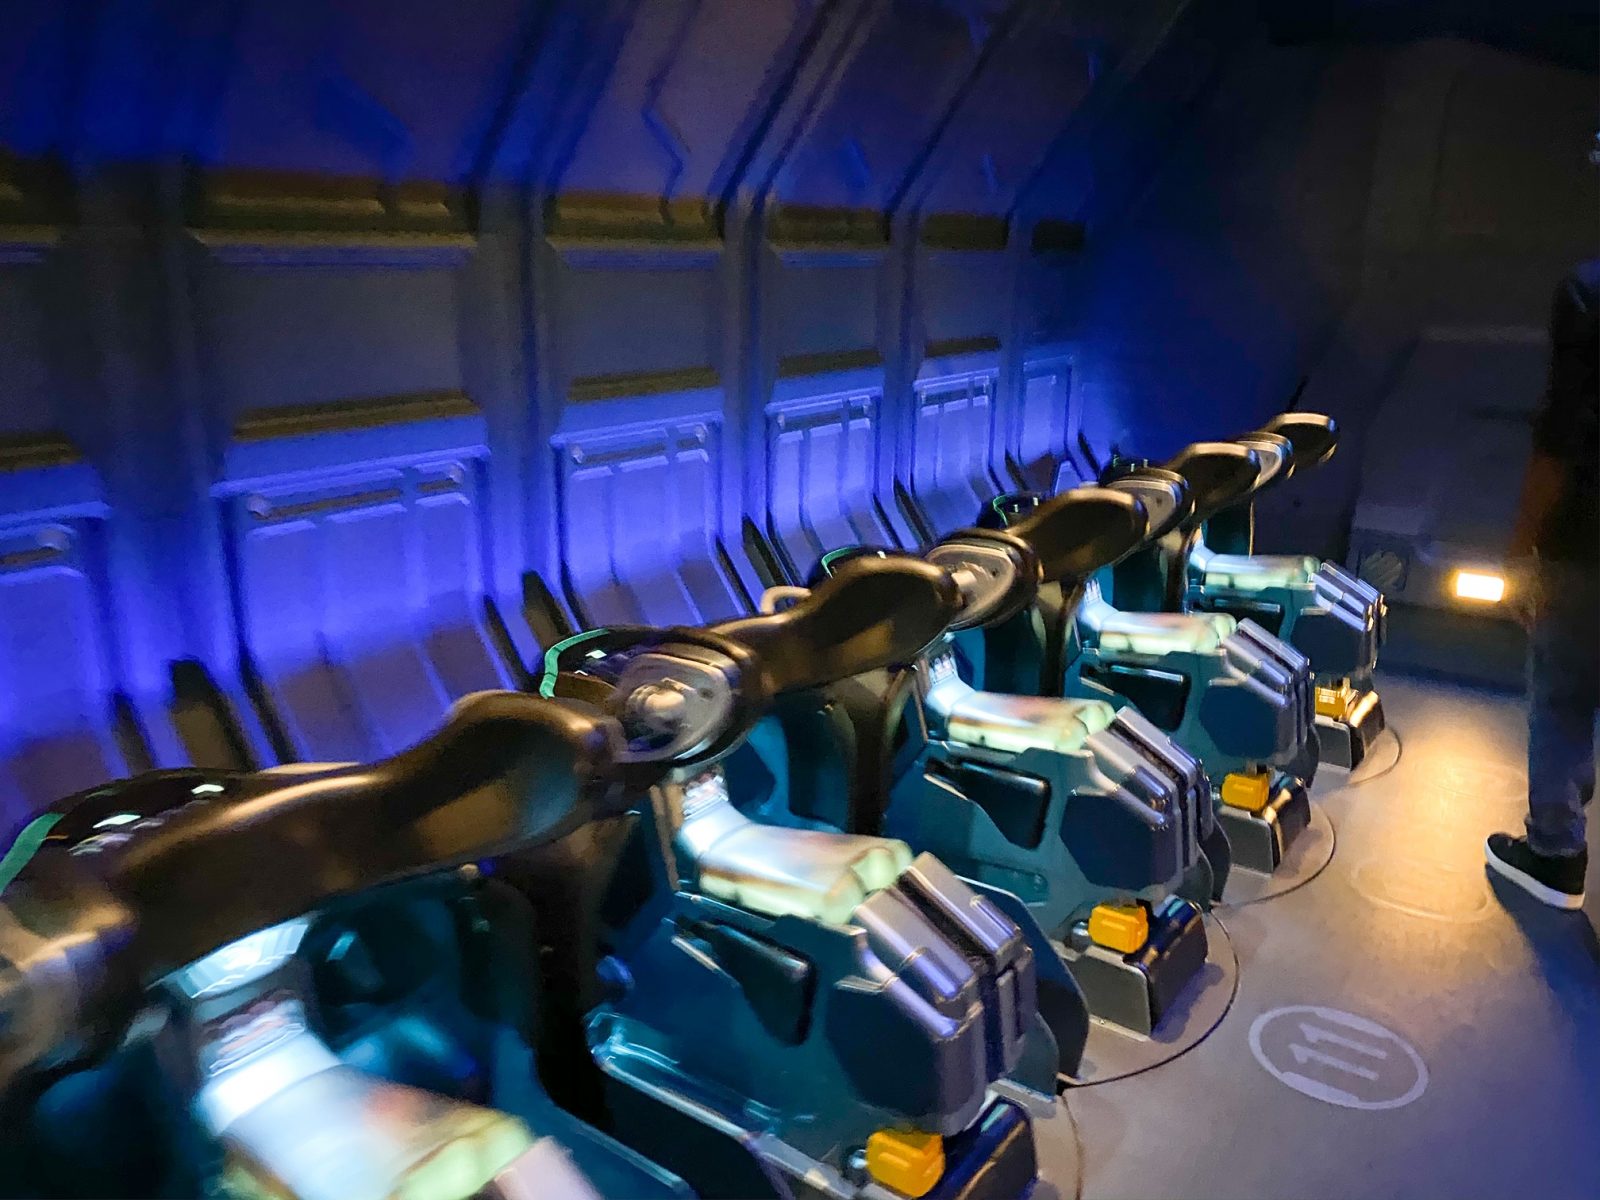 Green and black ride vehicles in front of blue wall for flight of passage ride